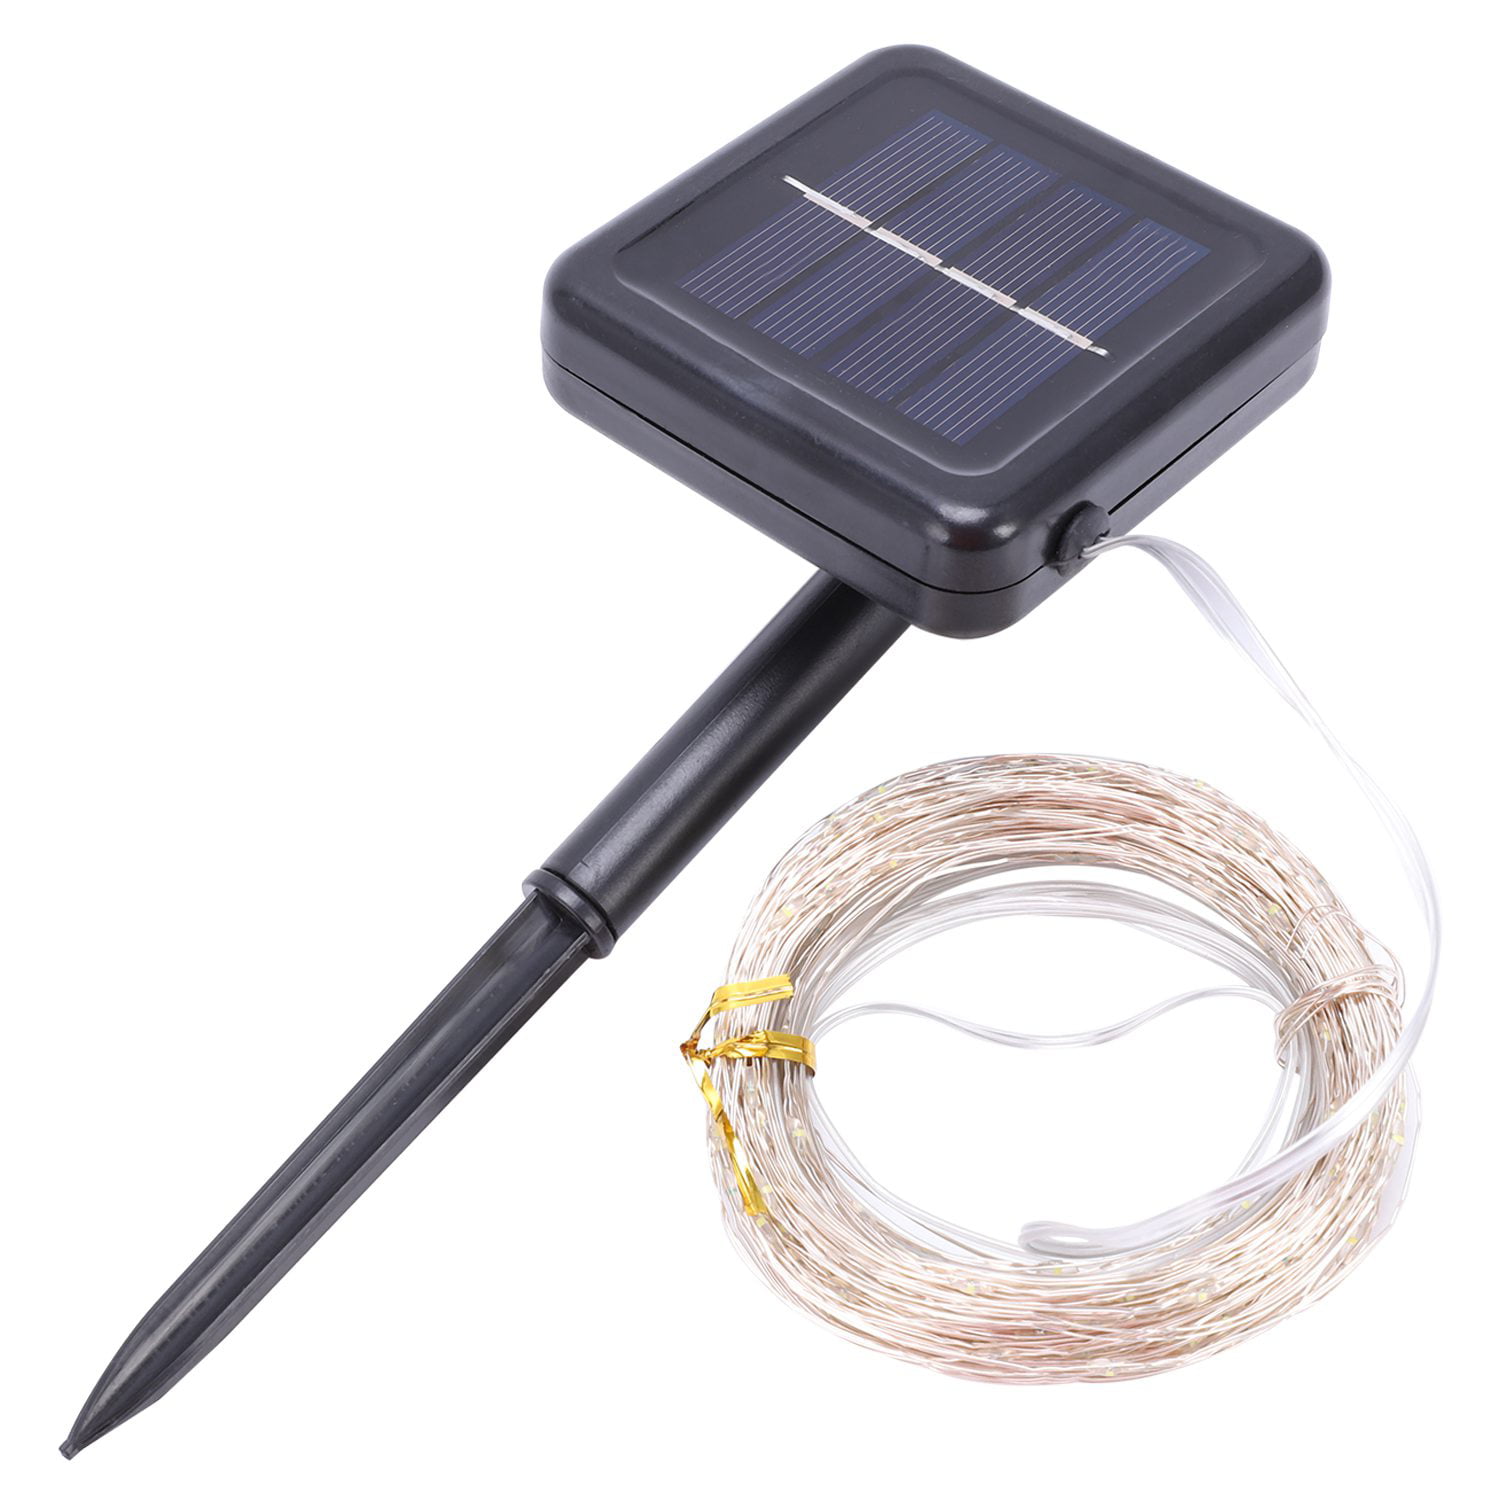 Details about   300LED Solar String Lights Waterproof 10/20M Copper Wire Fairy Outdoor Garden US 